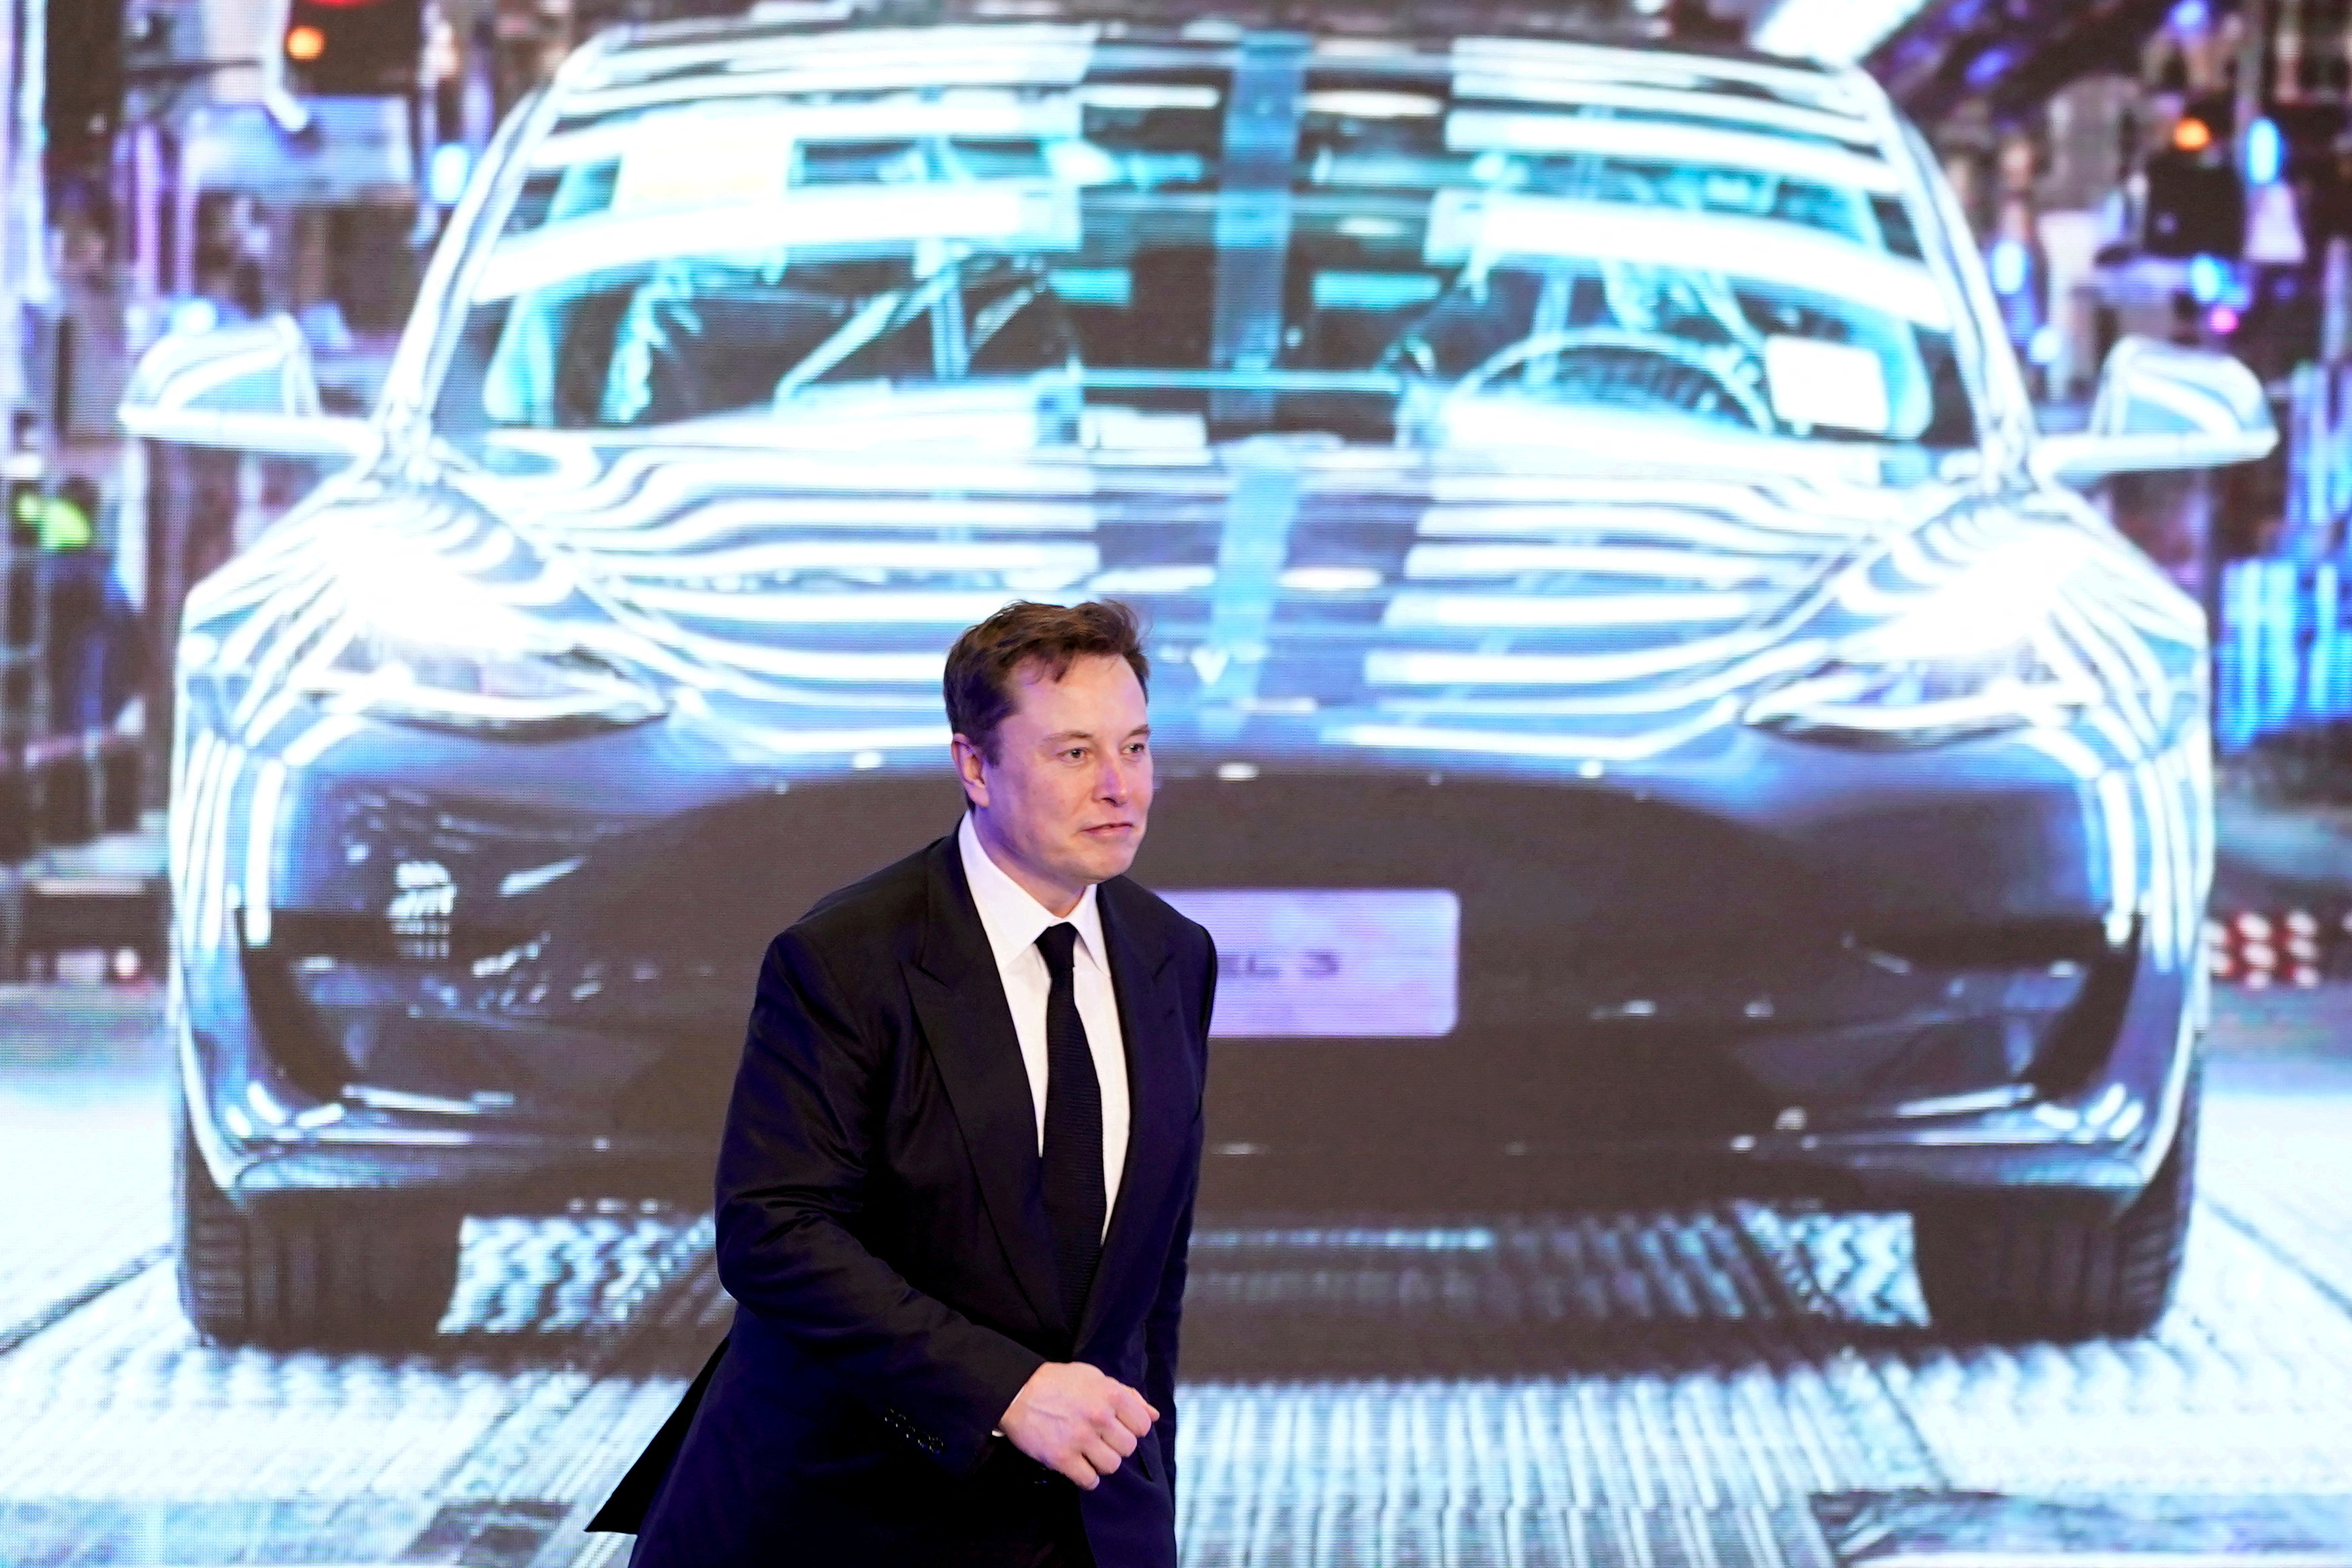 Analysis of Elon Musk's Tesla (TSLA) Share Selling and What it Means for the Future